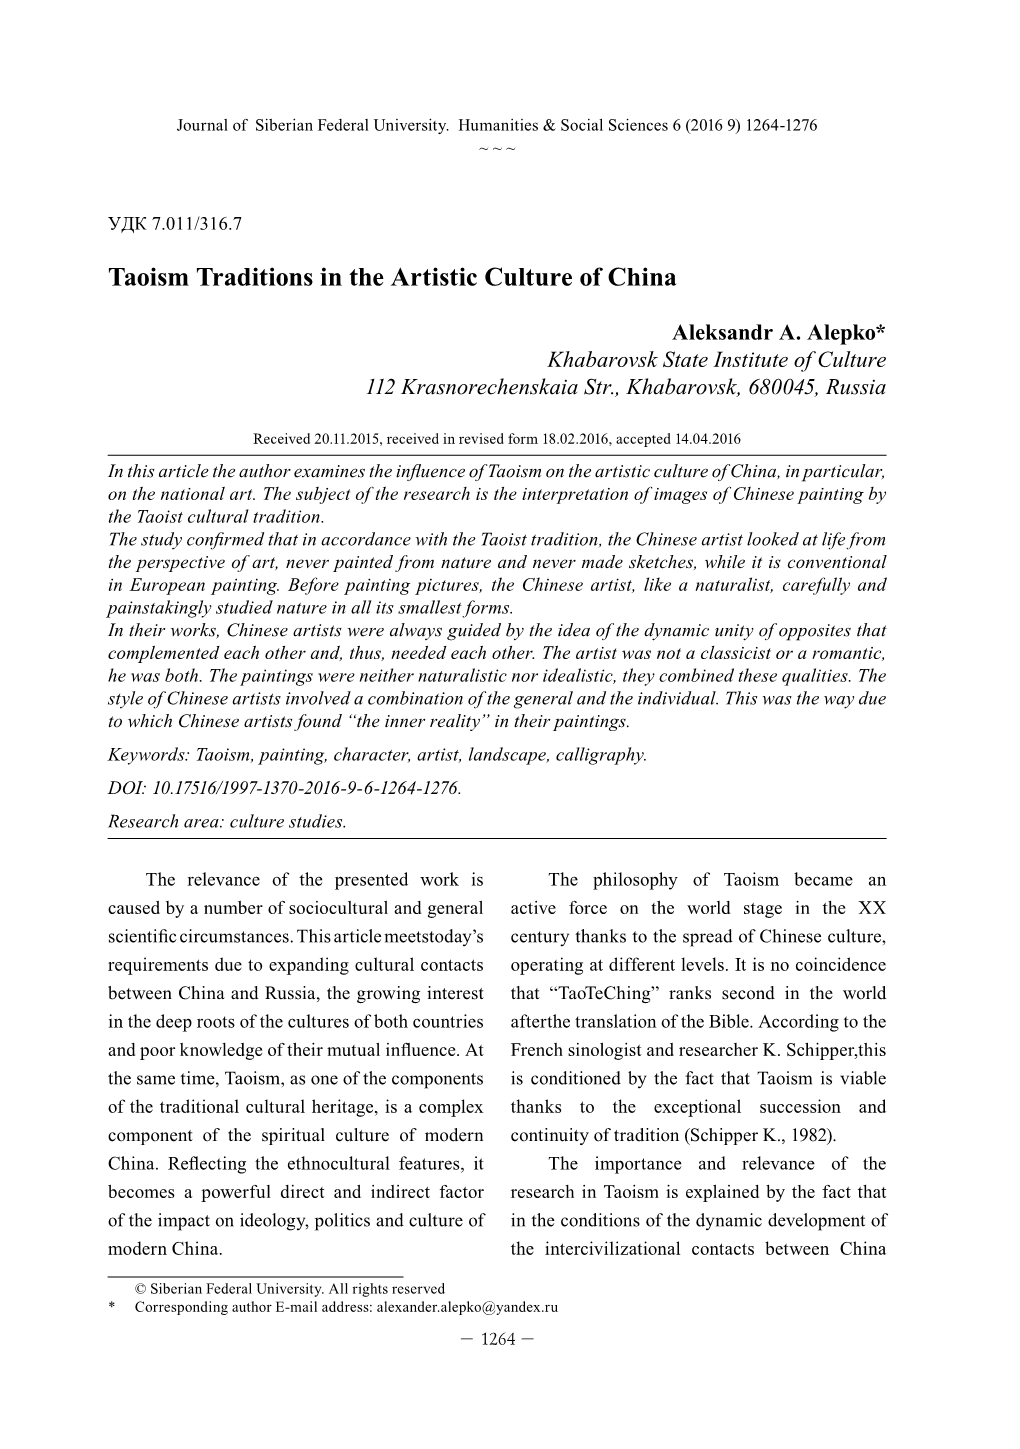 Taoism Traditions in the Artistic Culture of China